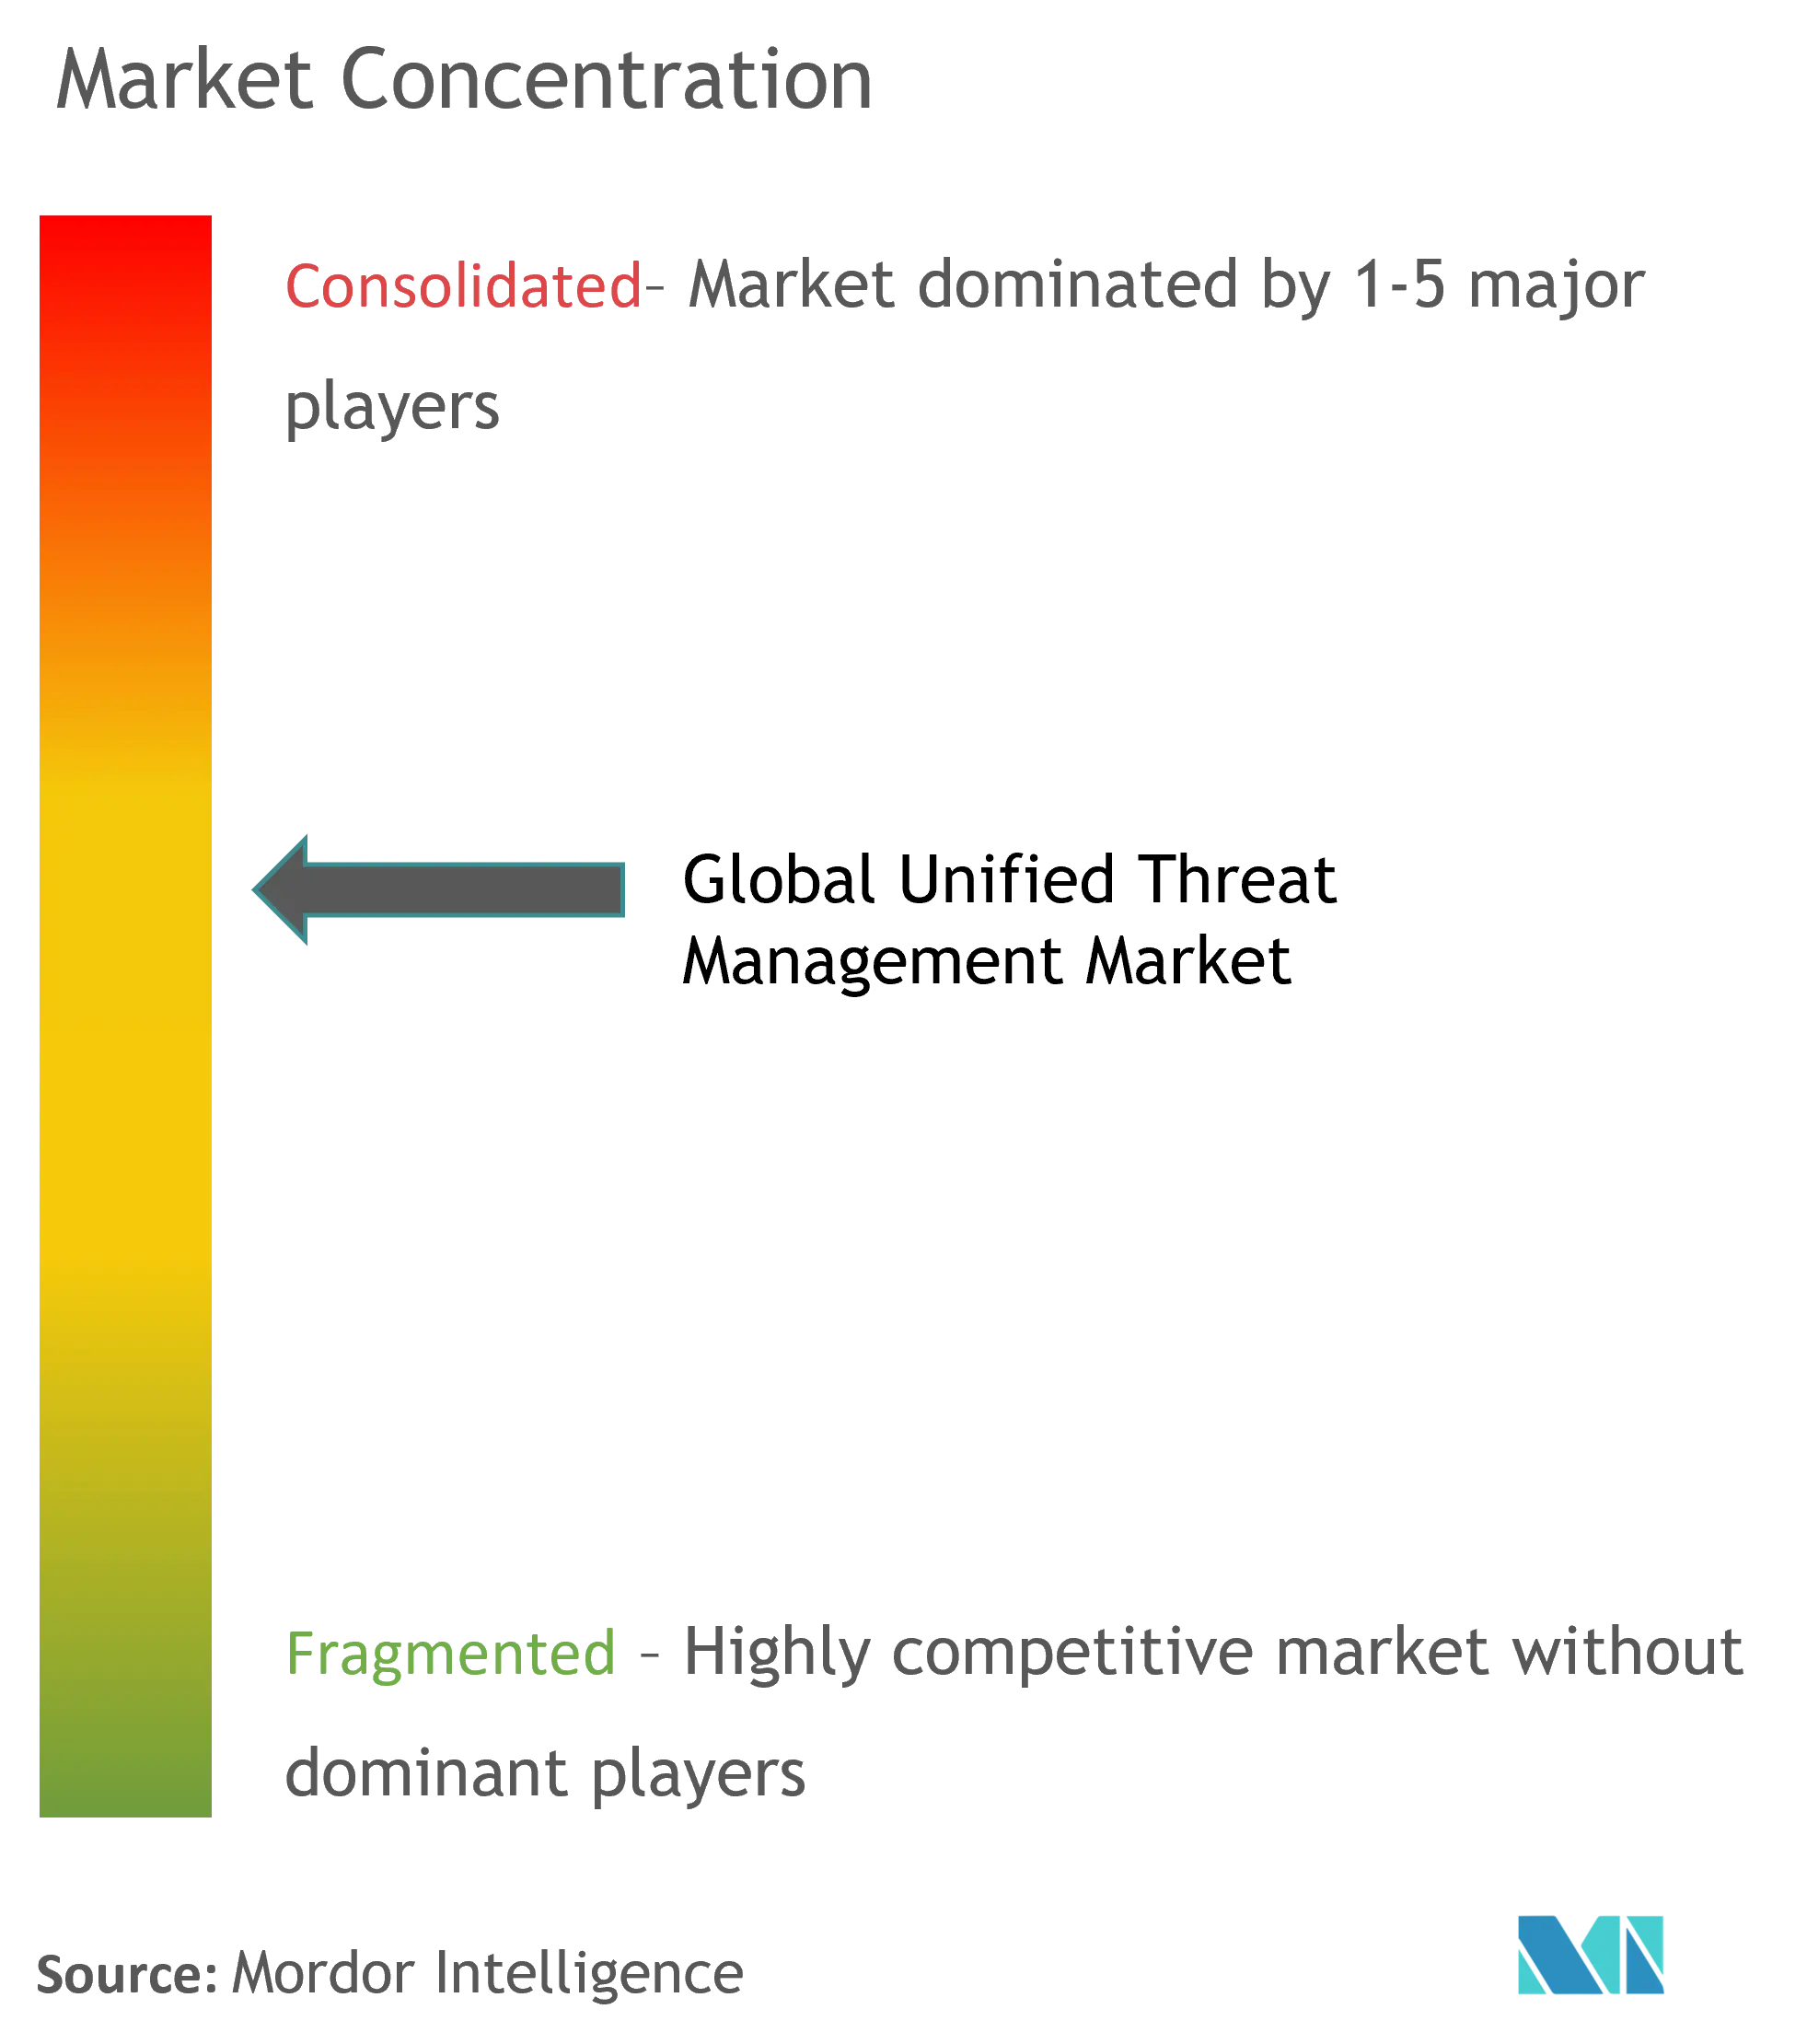 Unified Threat Management Market Concentration